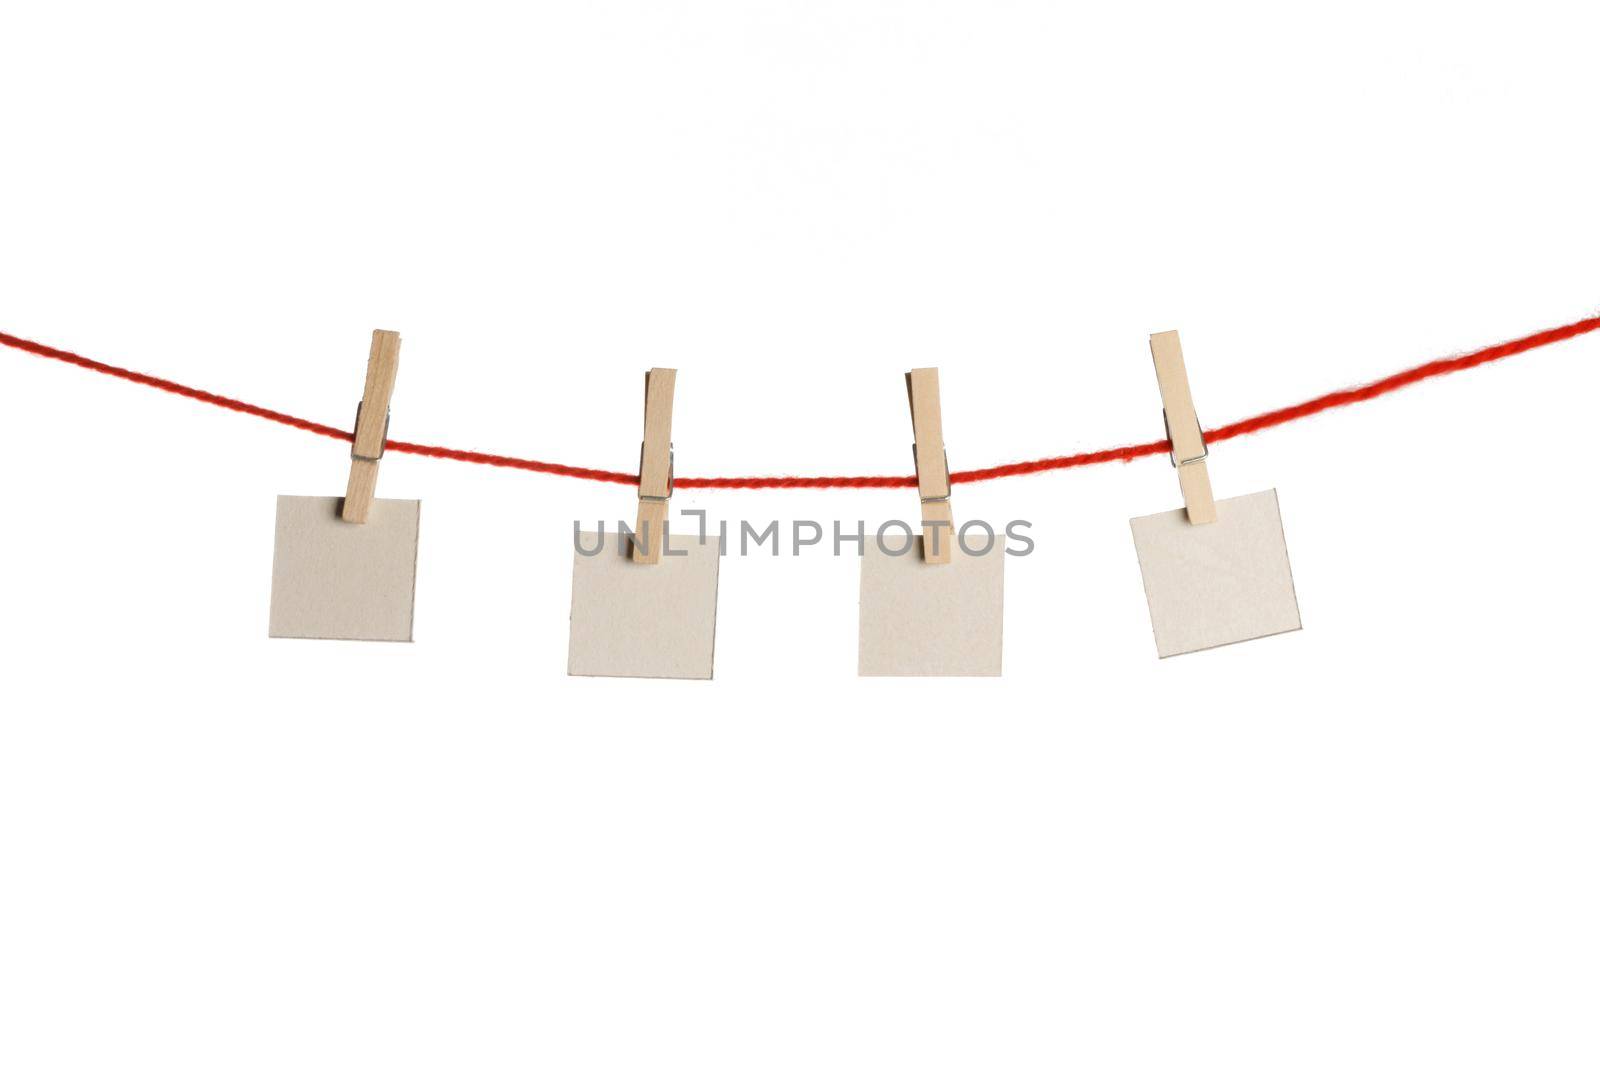 Set of four white blank paper notes held on red string with clothespins isolated on white background